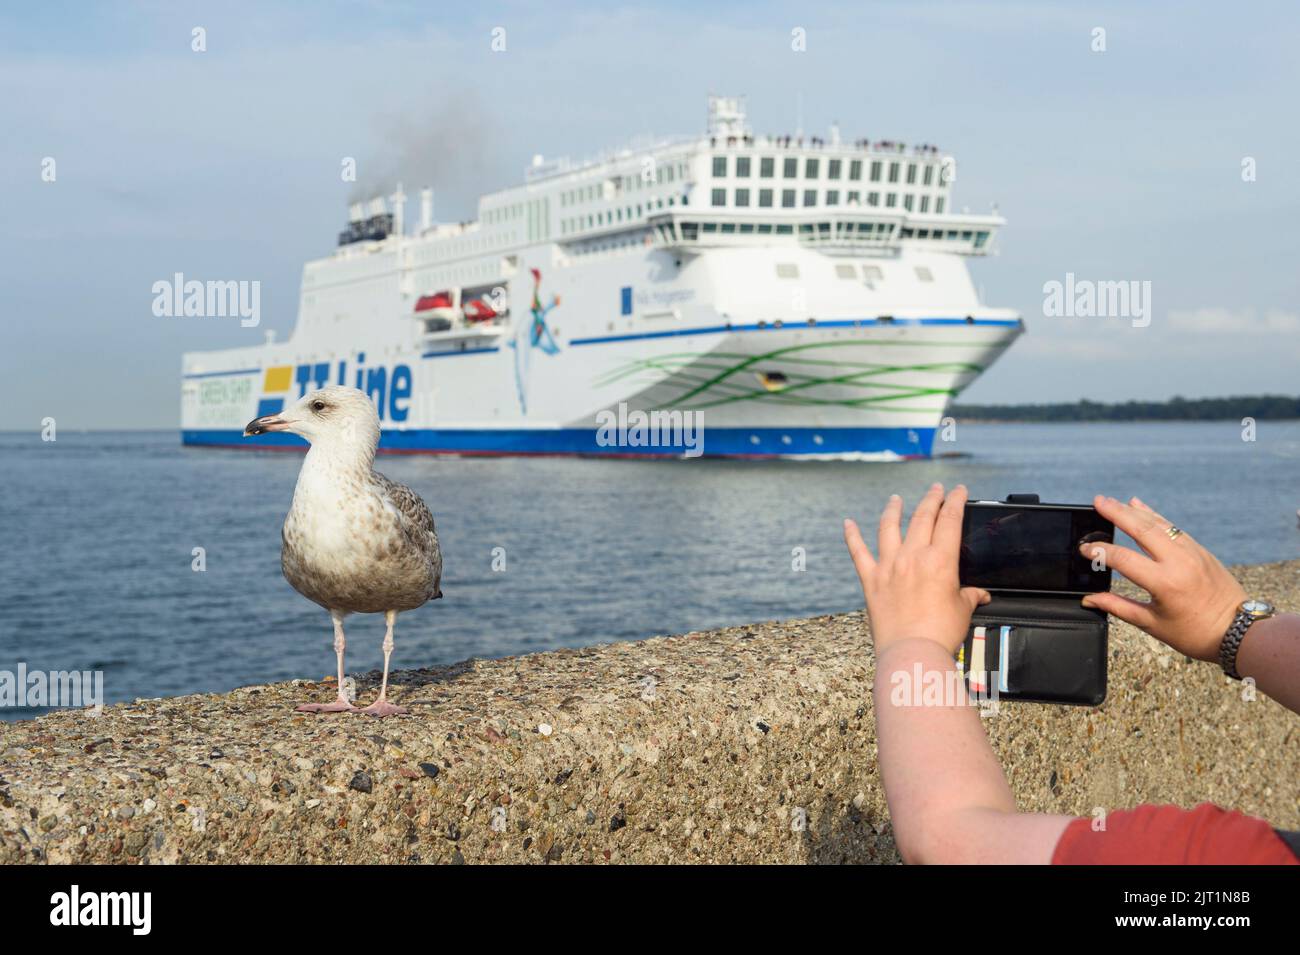 27 August 2022, Schleswig-Holstein, Lübeck-Travemünde: A woman takes a photo of a seagull and the TT-Line ferry 'Nils Holgersson' entering the port of Lübeck-Travemünde from the northern pier. The ship is powered by liquefied natural gas (LNG). Photo: Gregor Fischer/dpa Stock Photo